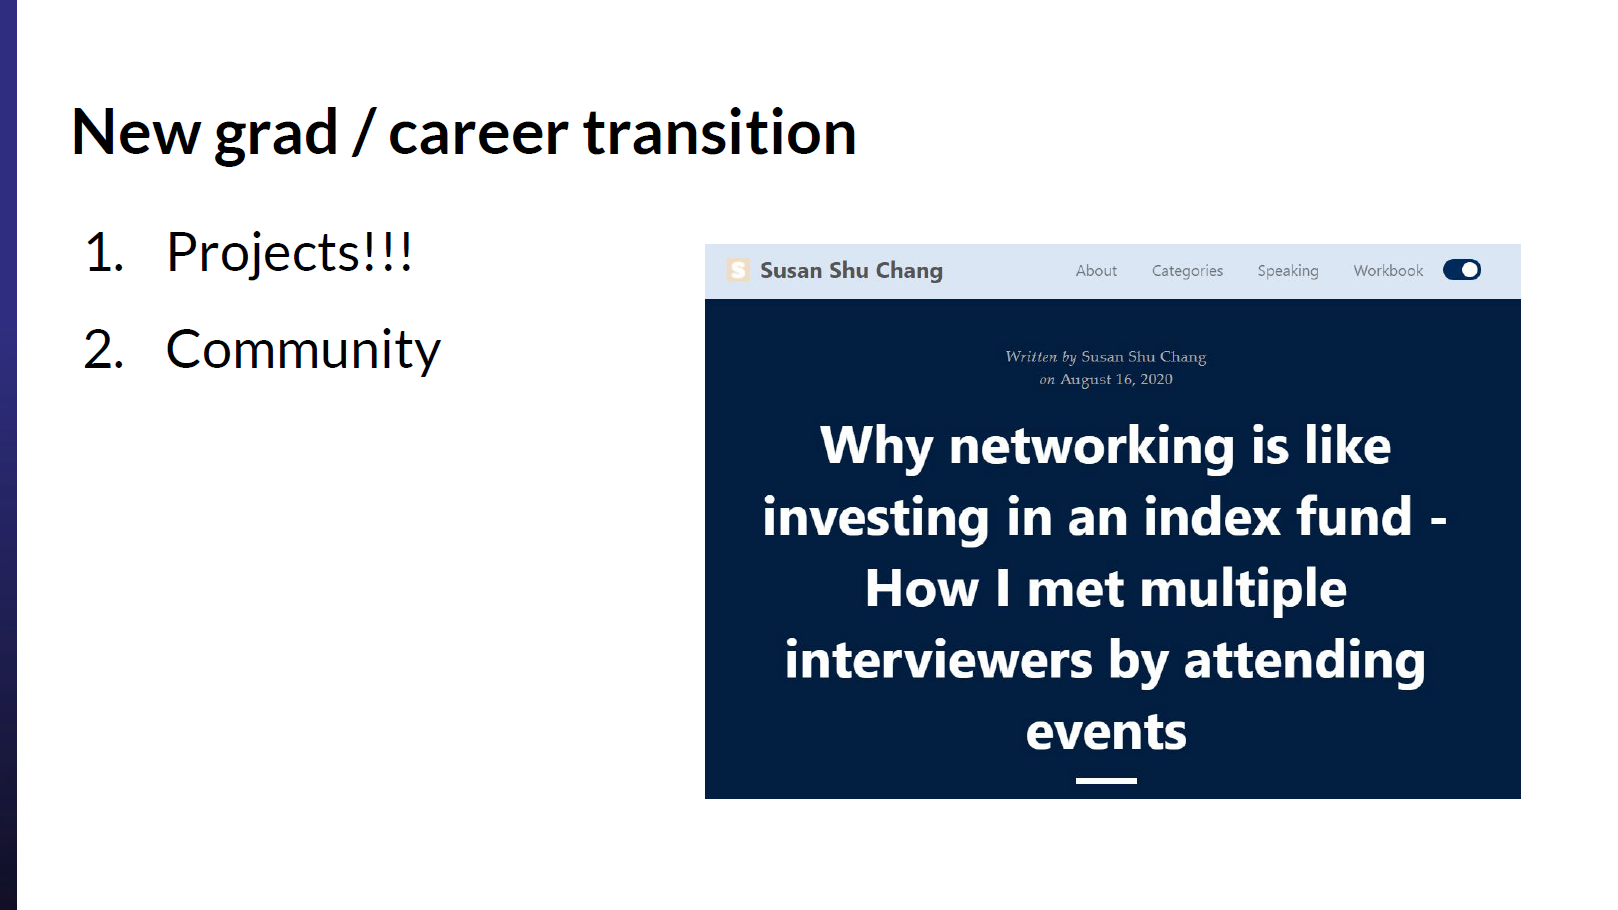 Finding a data science job as a new grad: Attending conferences and events.